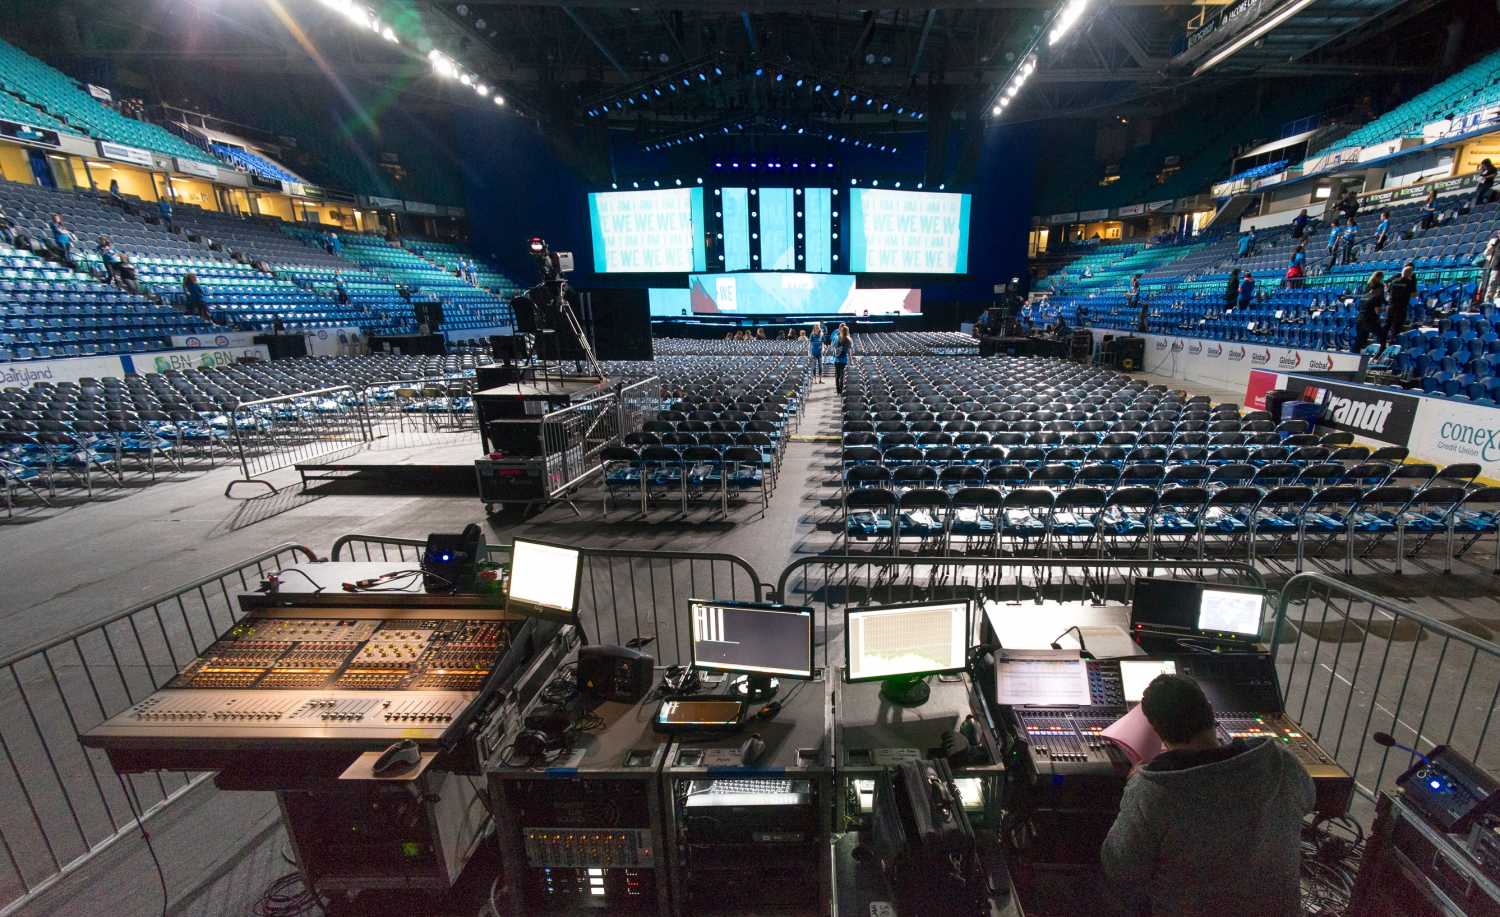 Adamson arrays were deployed for WE Day at the SaskTel Centre in Saskatoon, Canada (photo: Connor Sharpe)